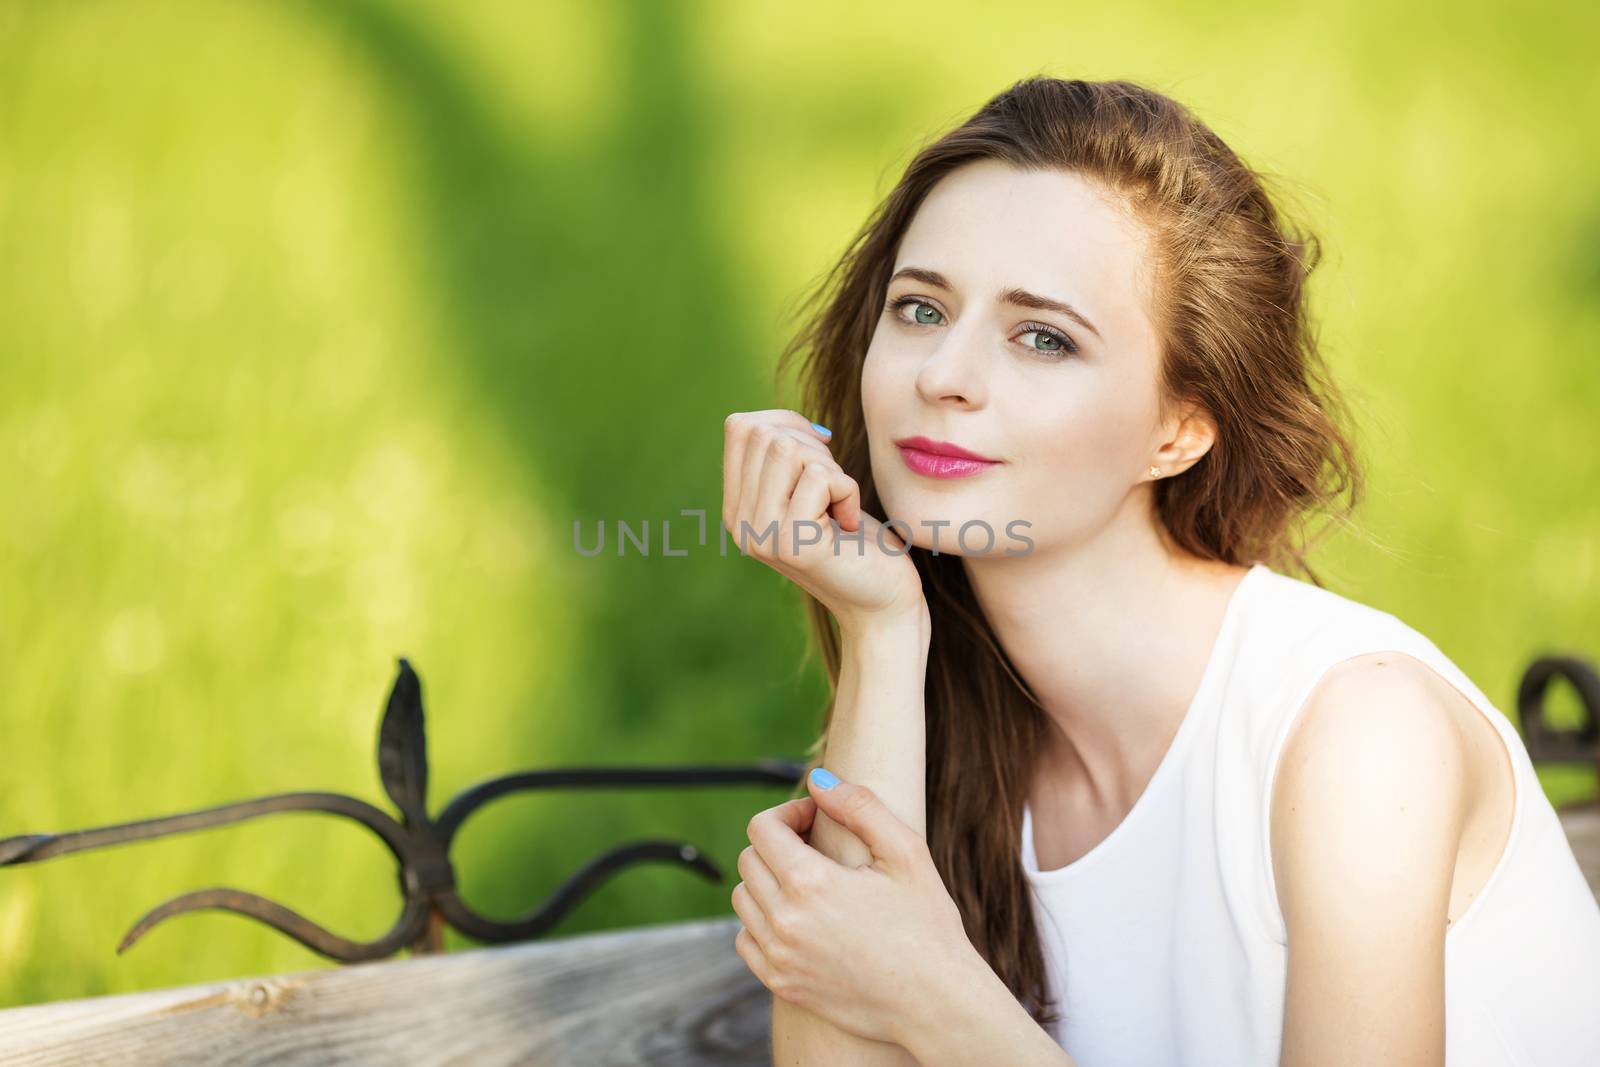 Lovely urban girl sitting on a bench in a city park. Portrait of a happy smiling woman.